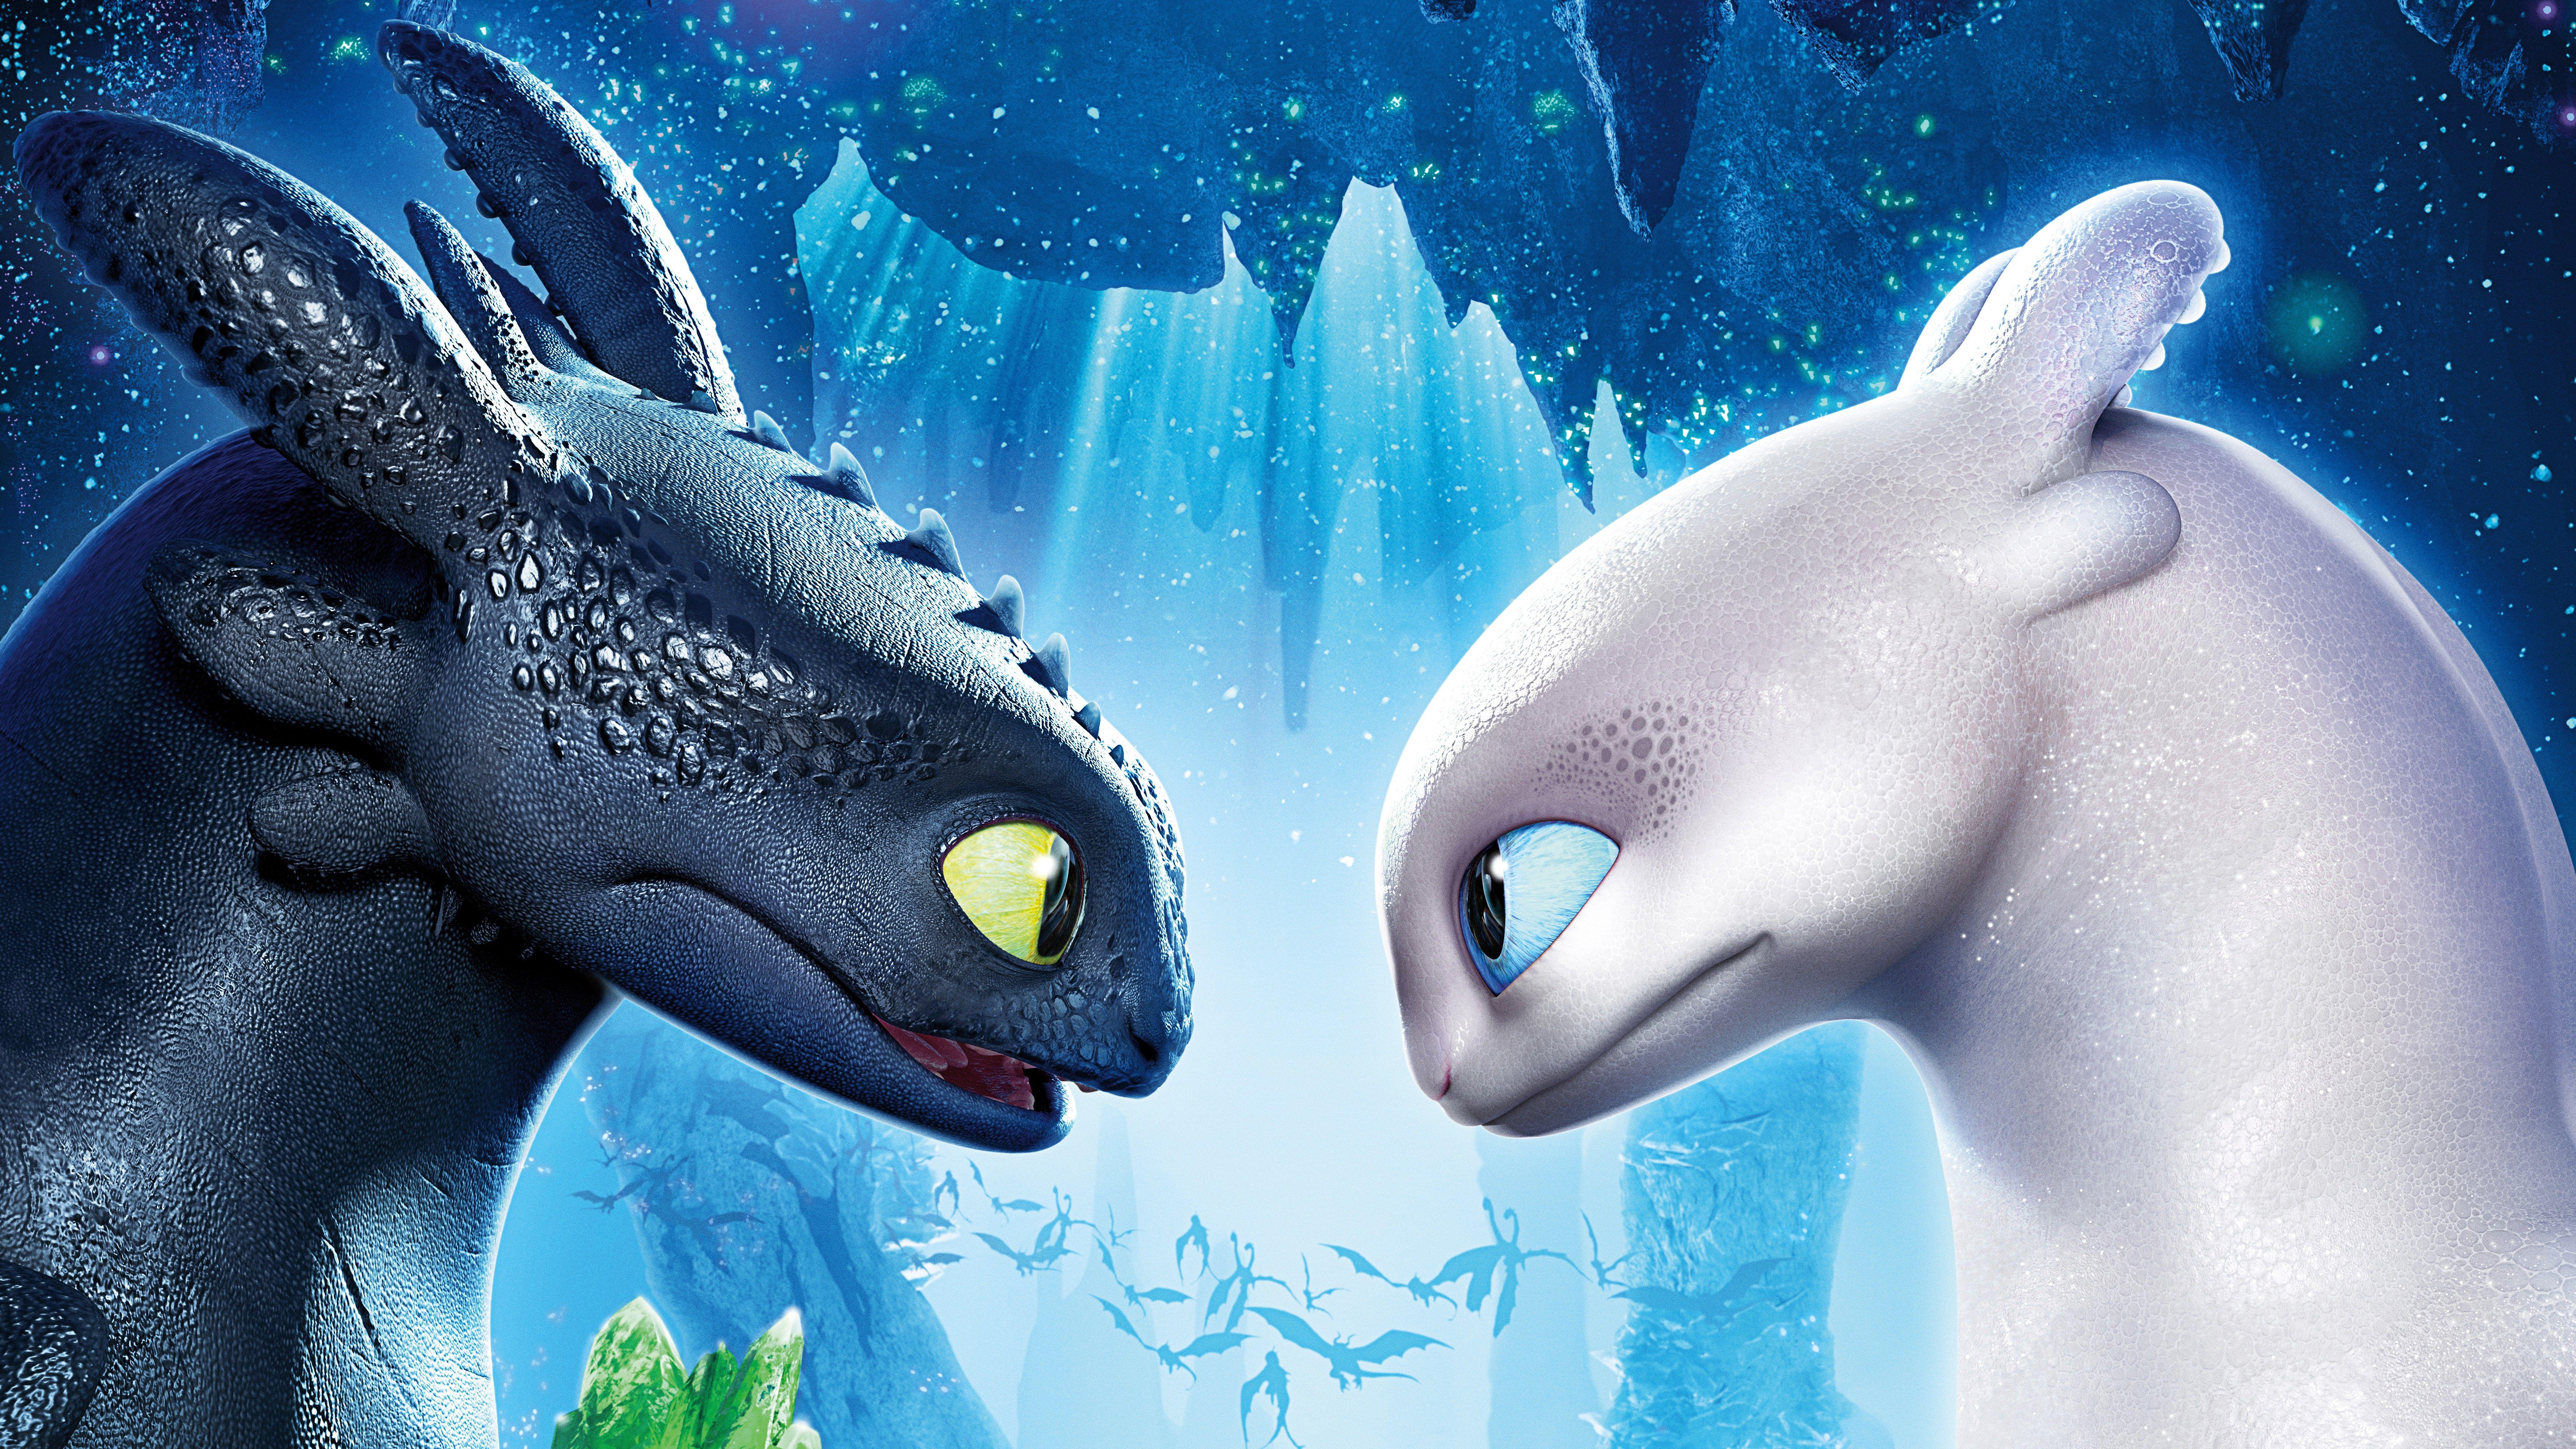 Download wallpaper 950x1534 toothless and light fury romantic love  dragons iphone 950x1534 hd background 15368